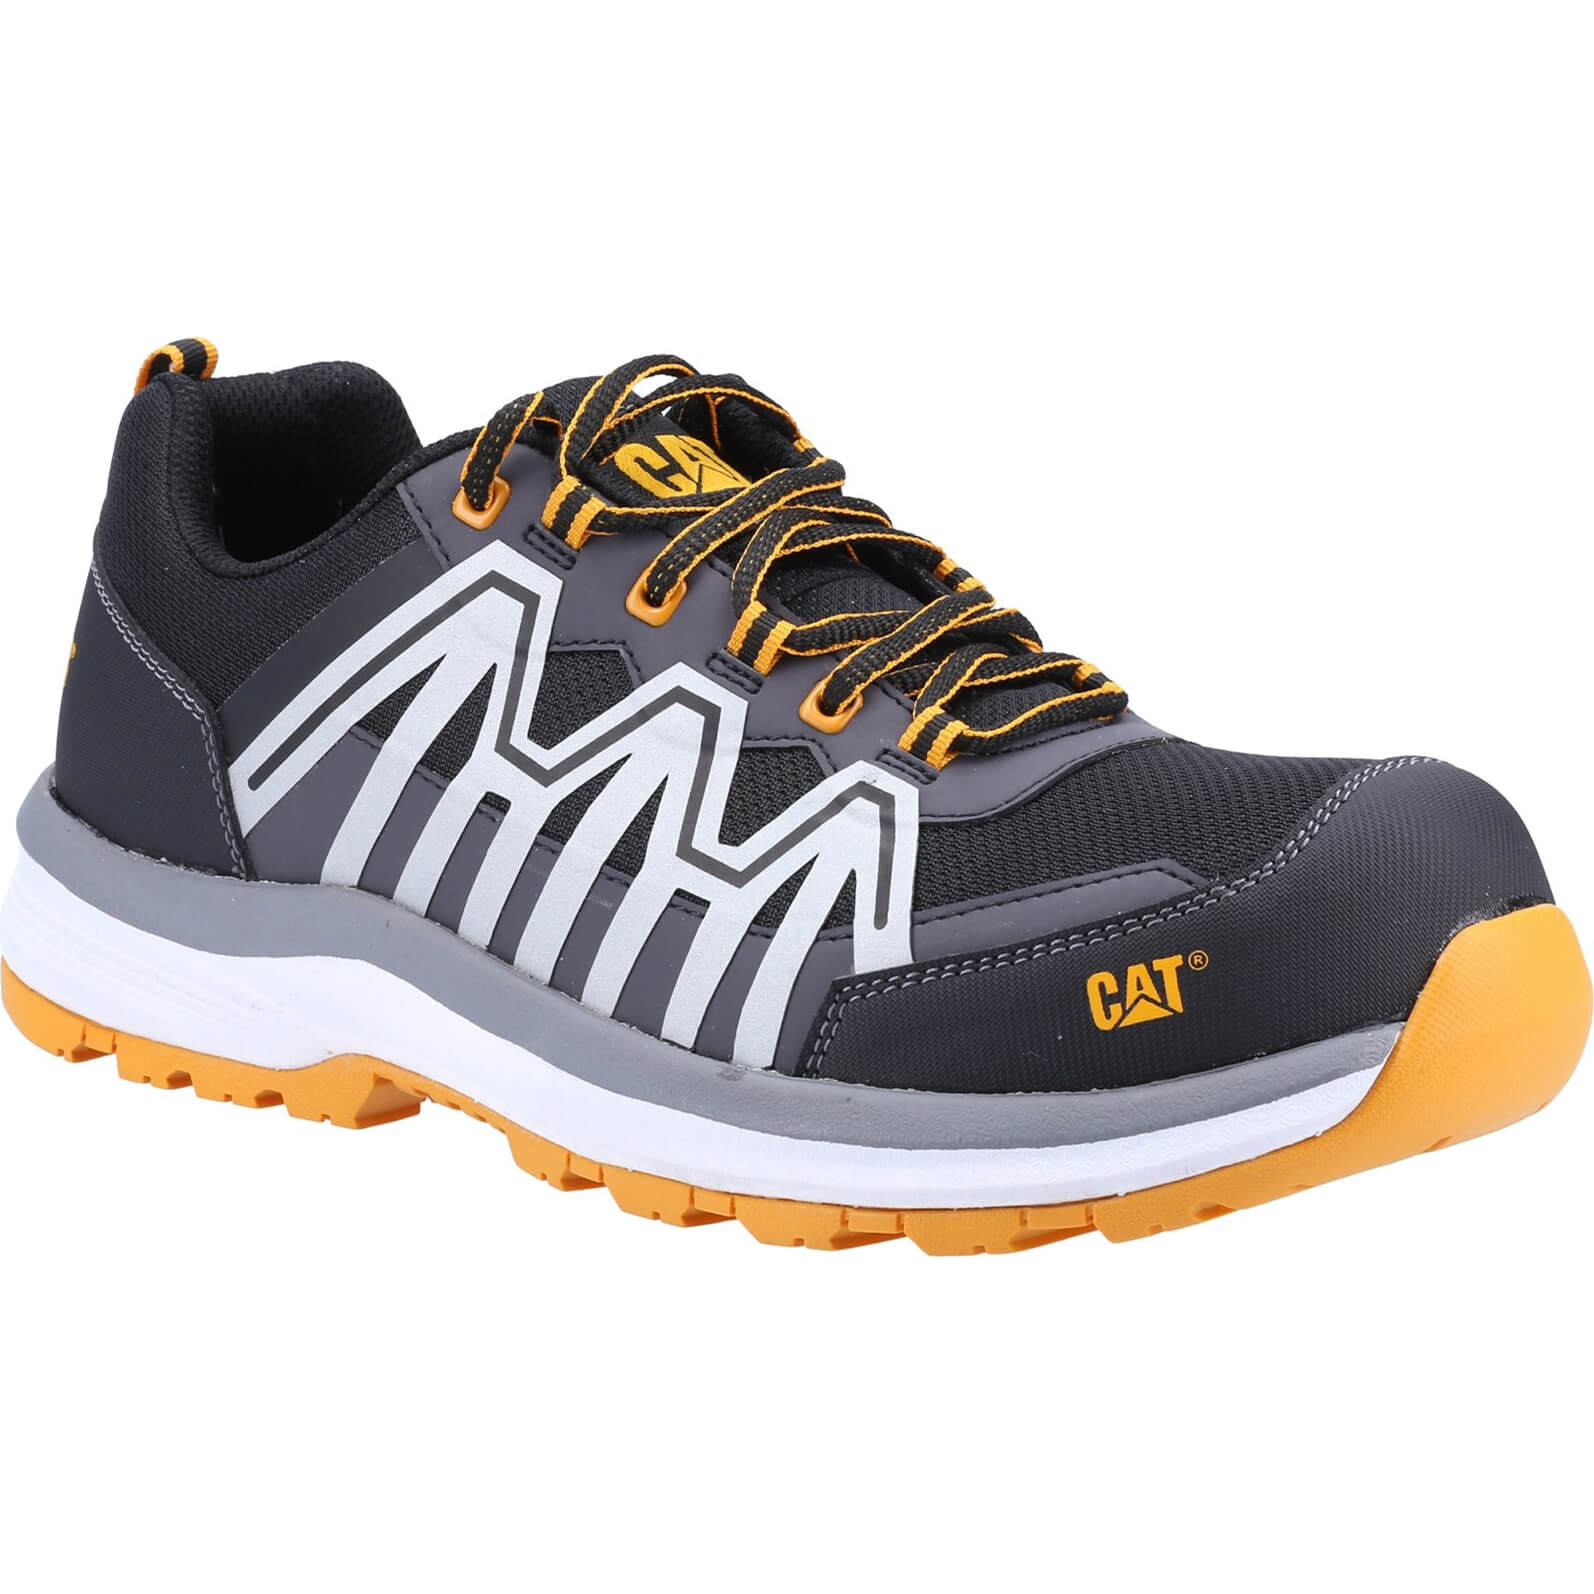 Image of Caterpillar Mens Charge S3 Safety Trainer Orange Size 10